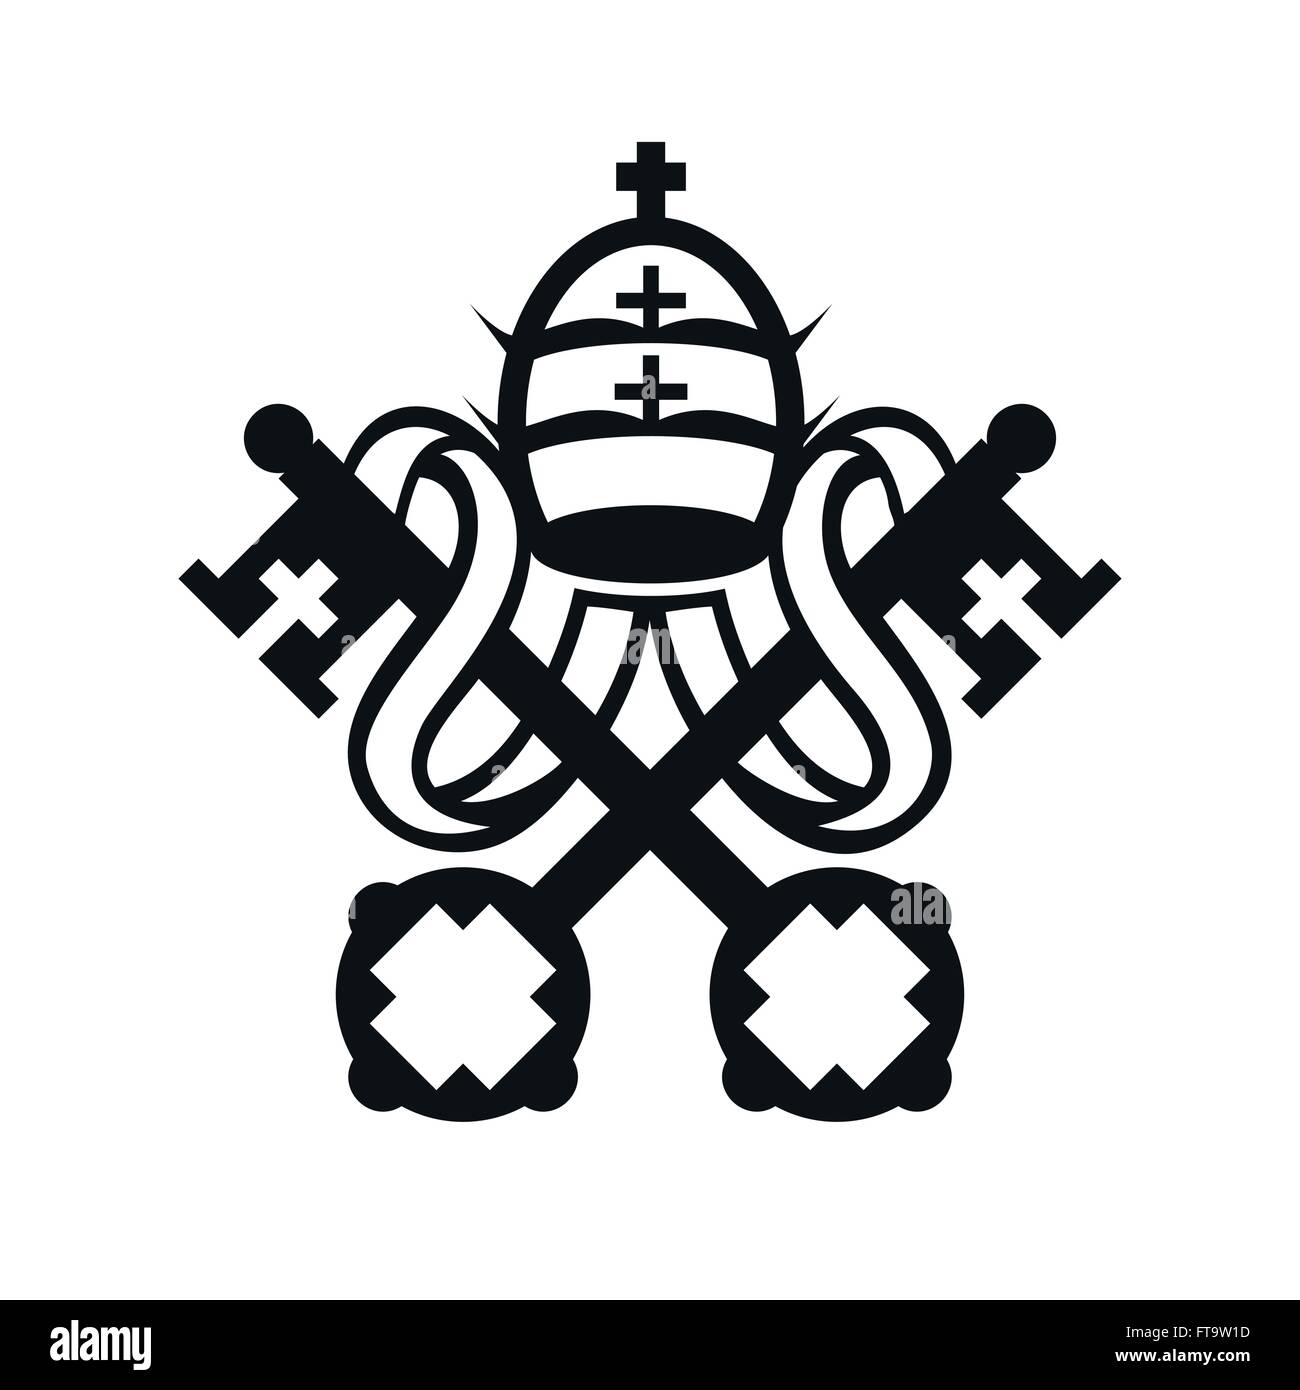 Coat of arms of Vatican City State and the Holy See symbol emblem flag, crossed keys and tiara simple monochromatic vector icon Stock Vector